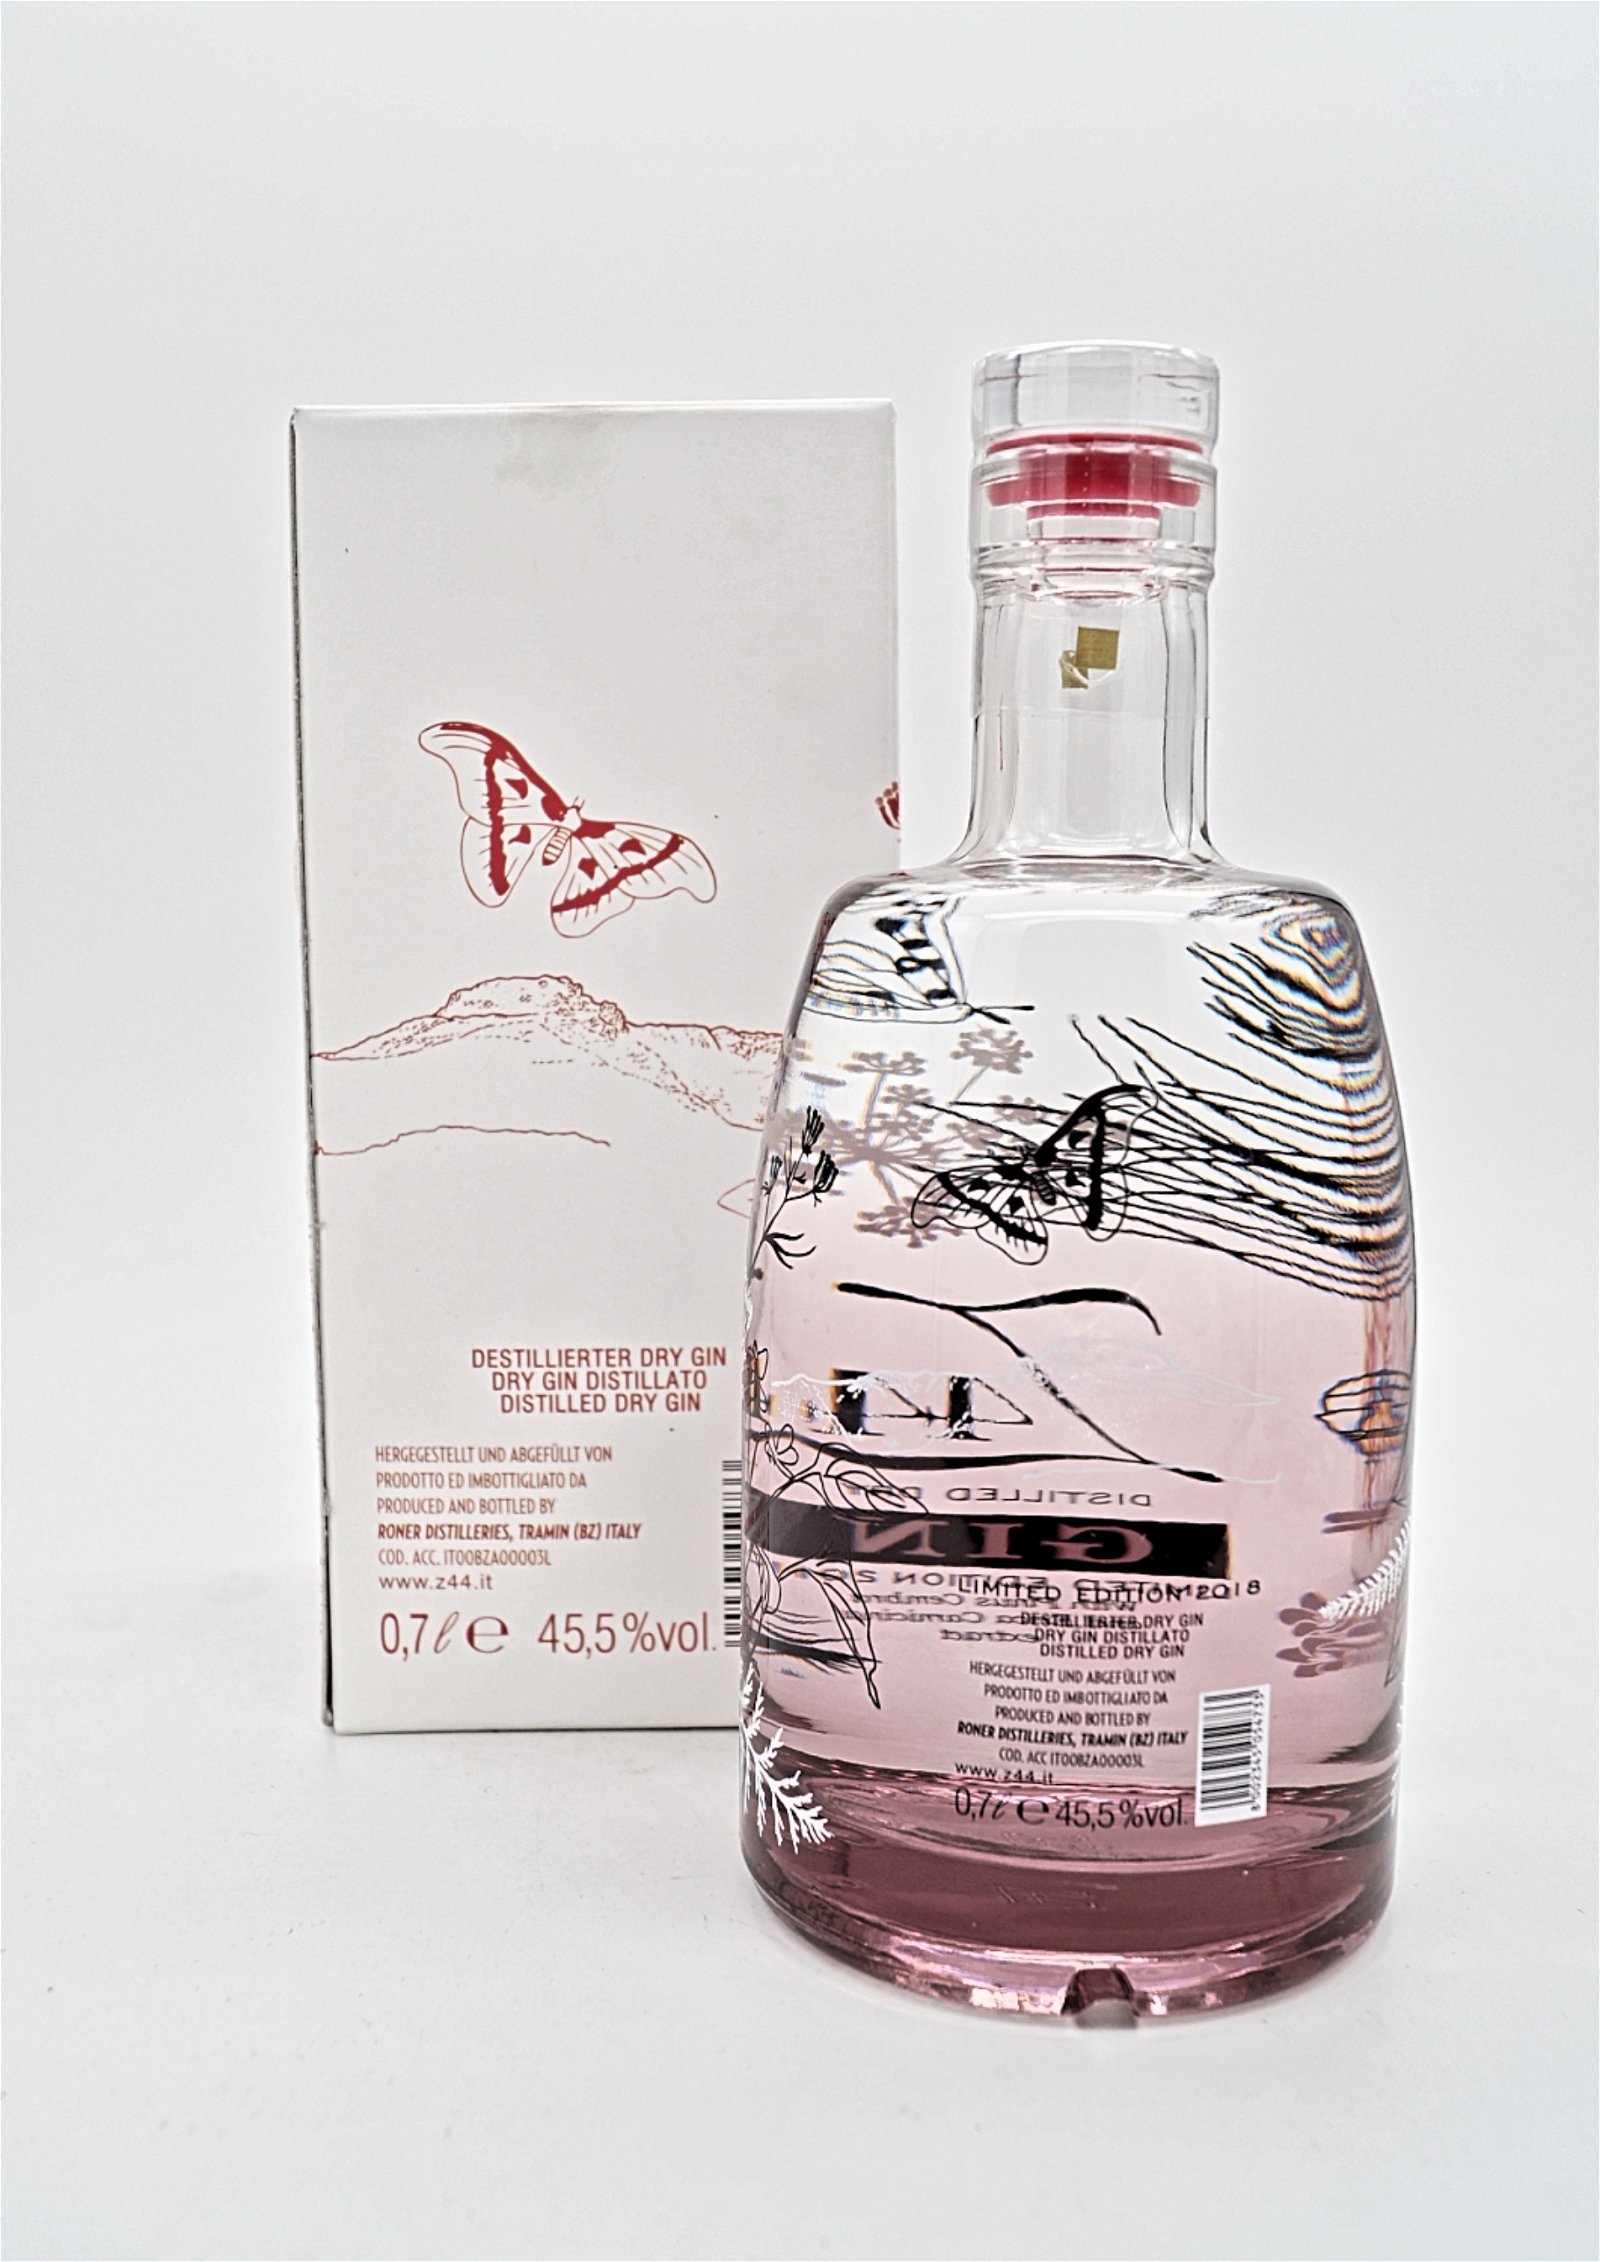 Z44 Limited Edition 2018 Distilled Dry Gin